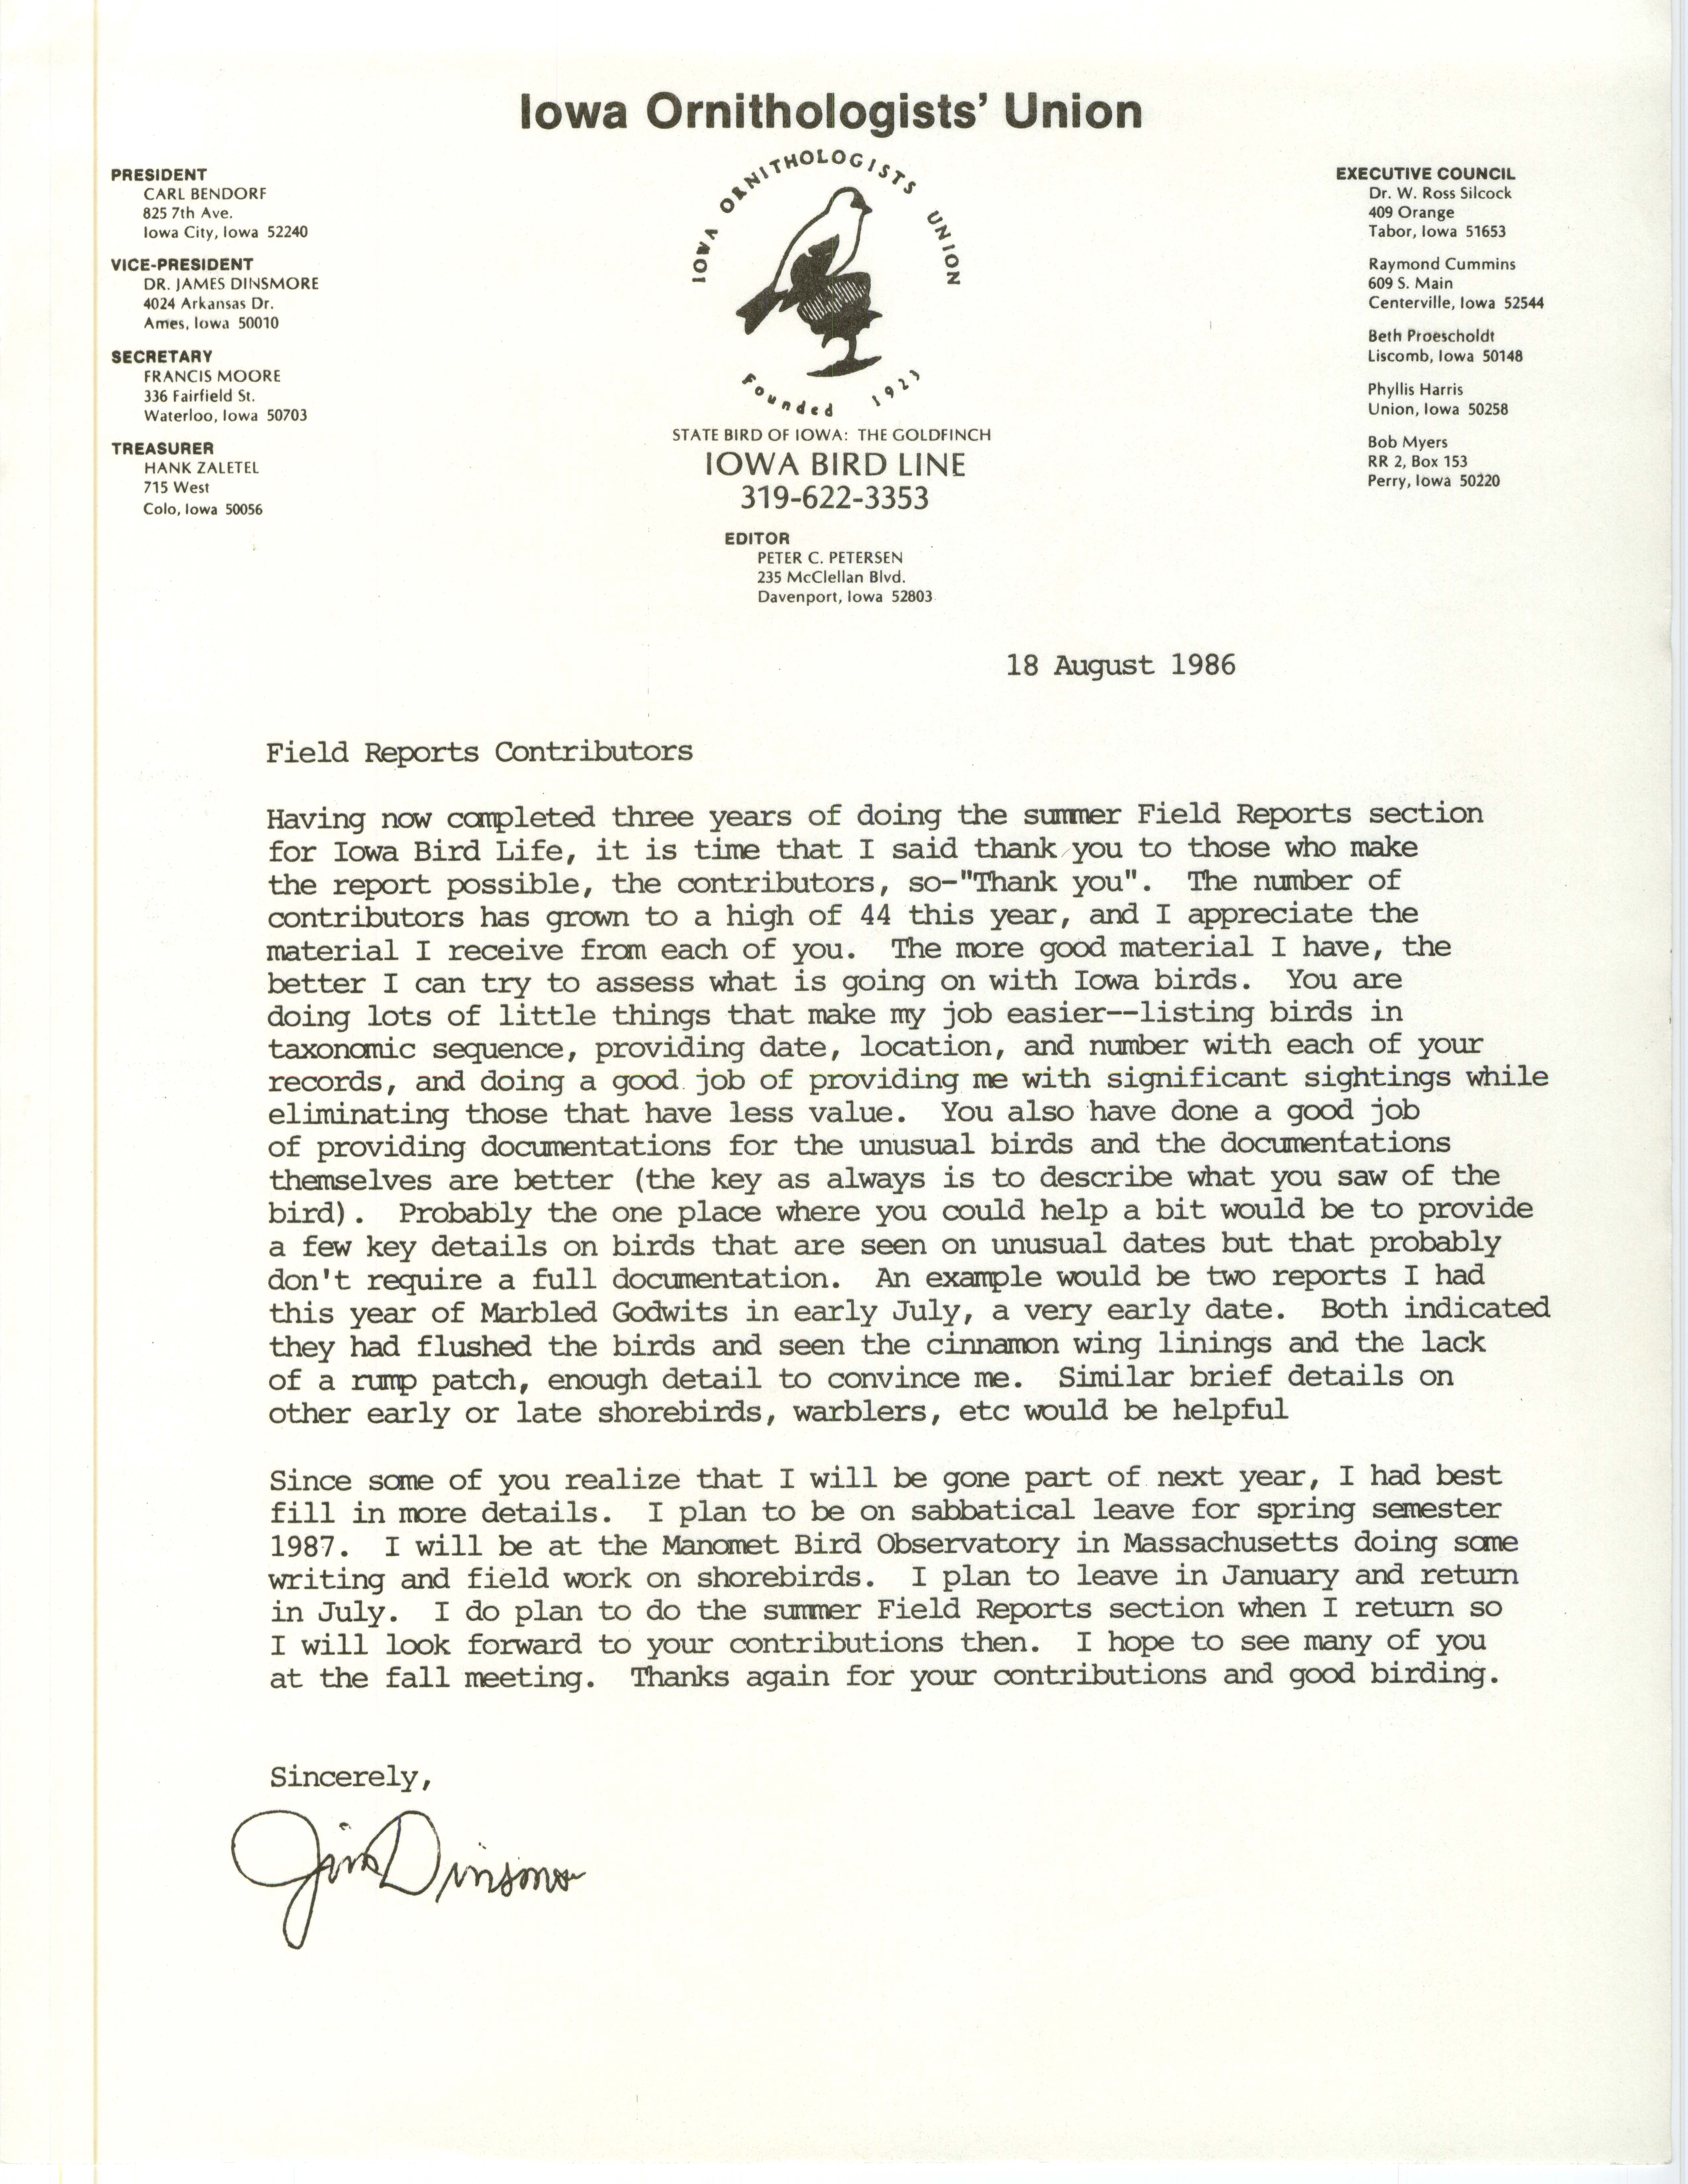 James J. Dinsmore letter to field report contributors regarding field reports, August 18, 1986